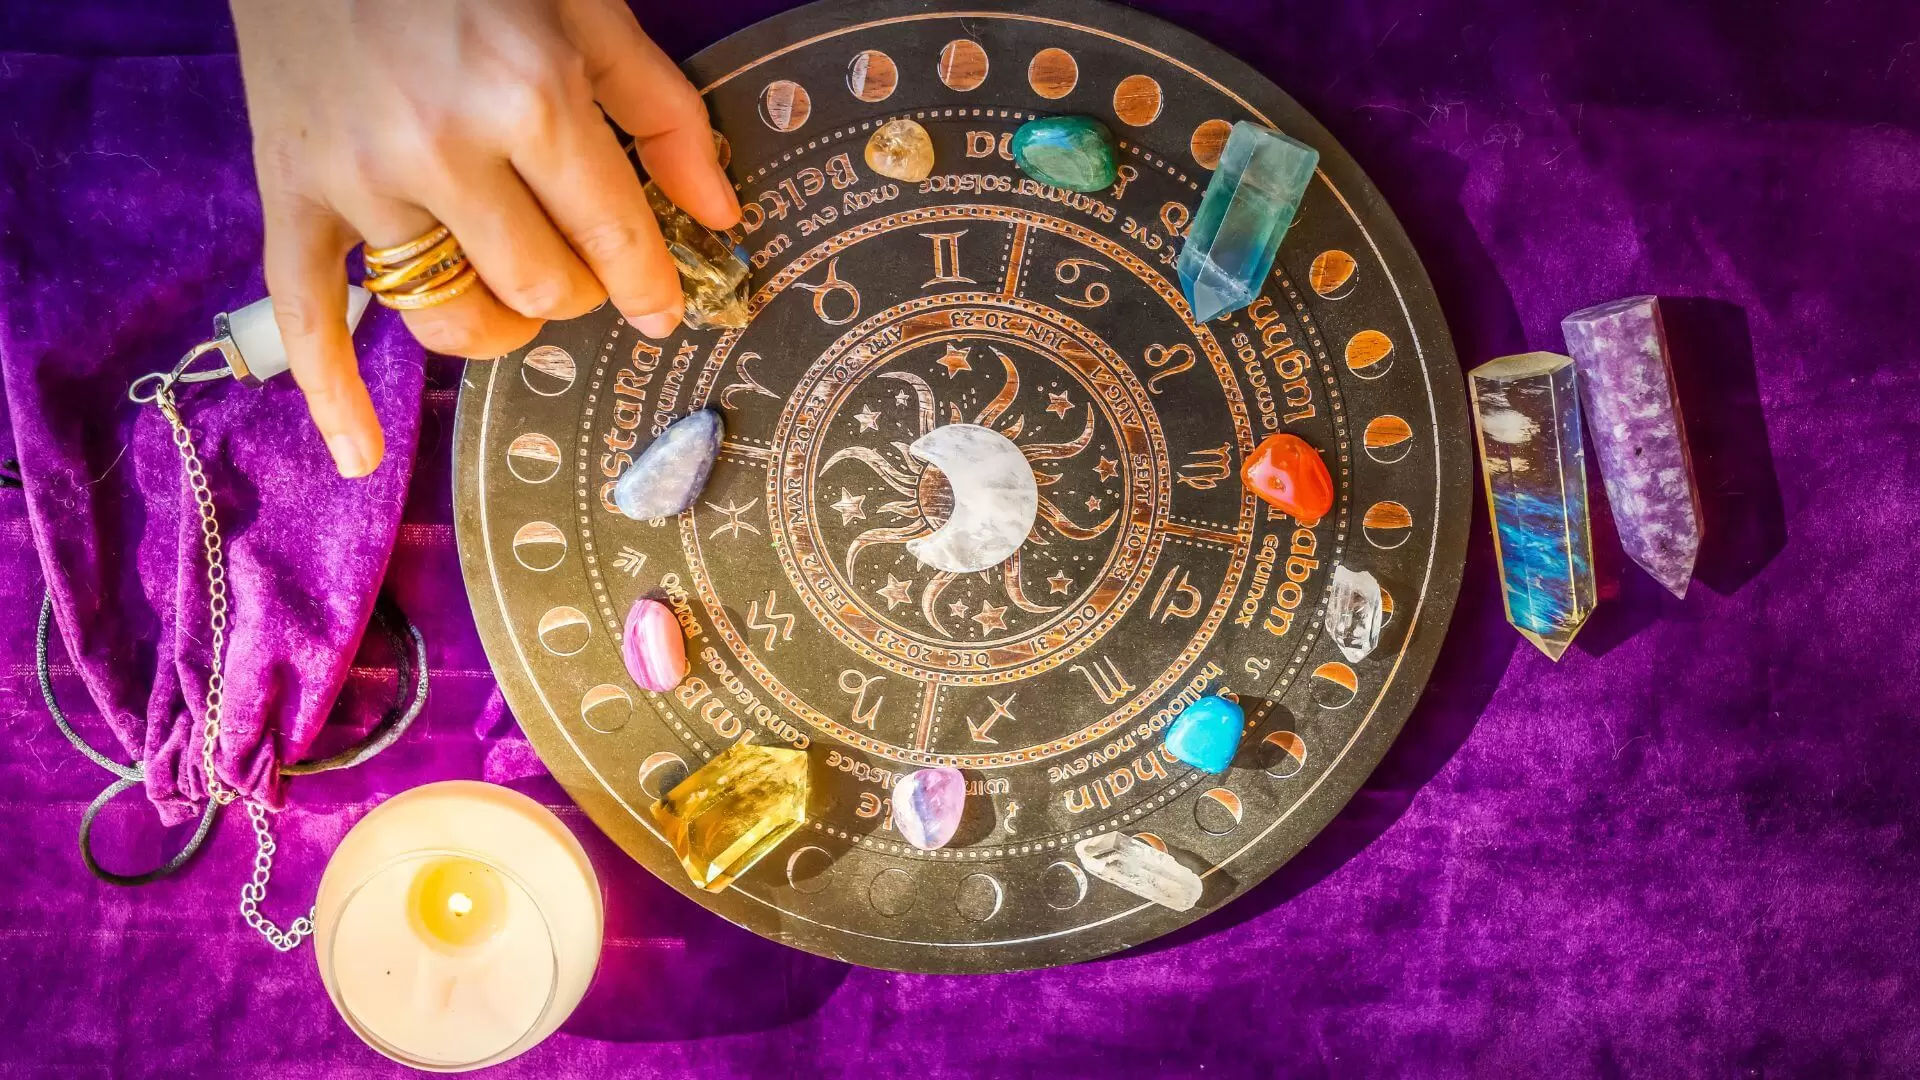 Zodiac Stones According To Your Sign (1)